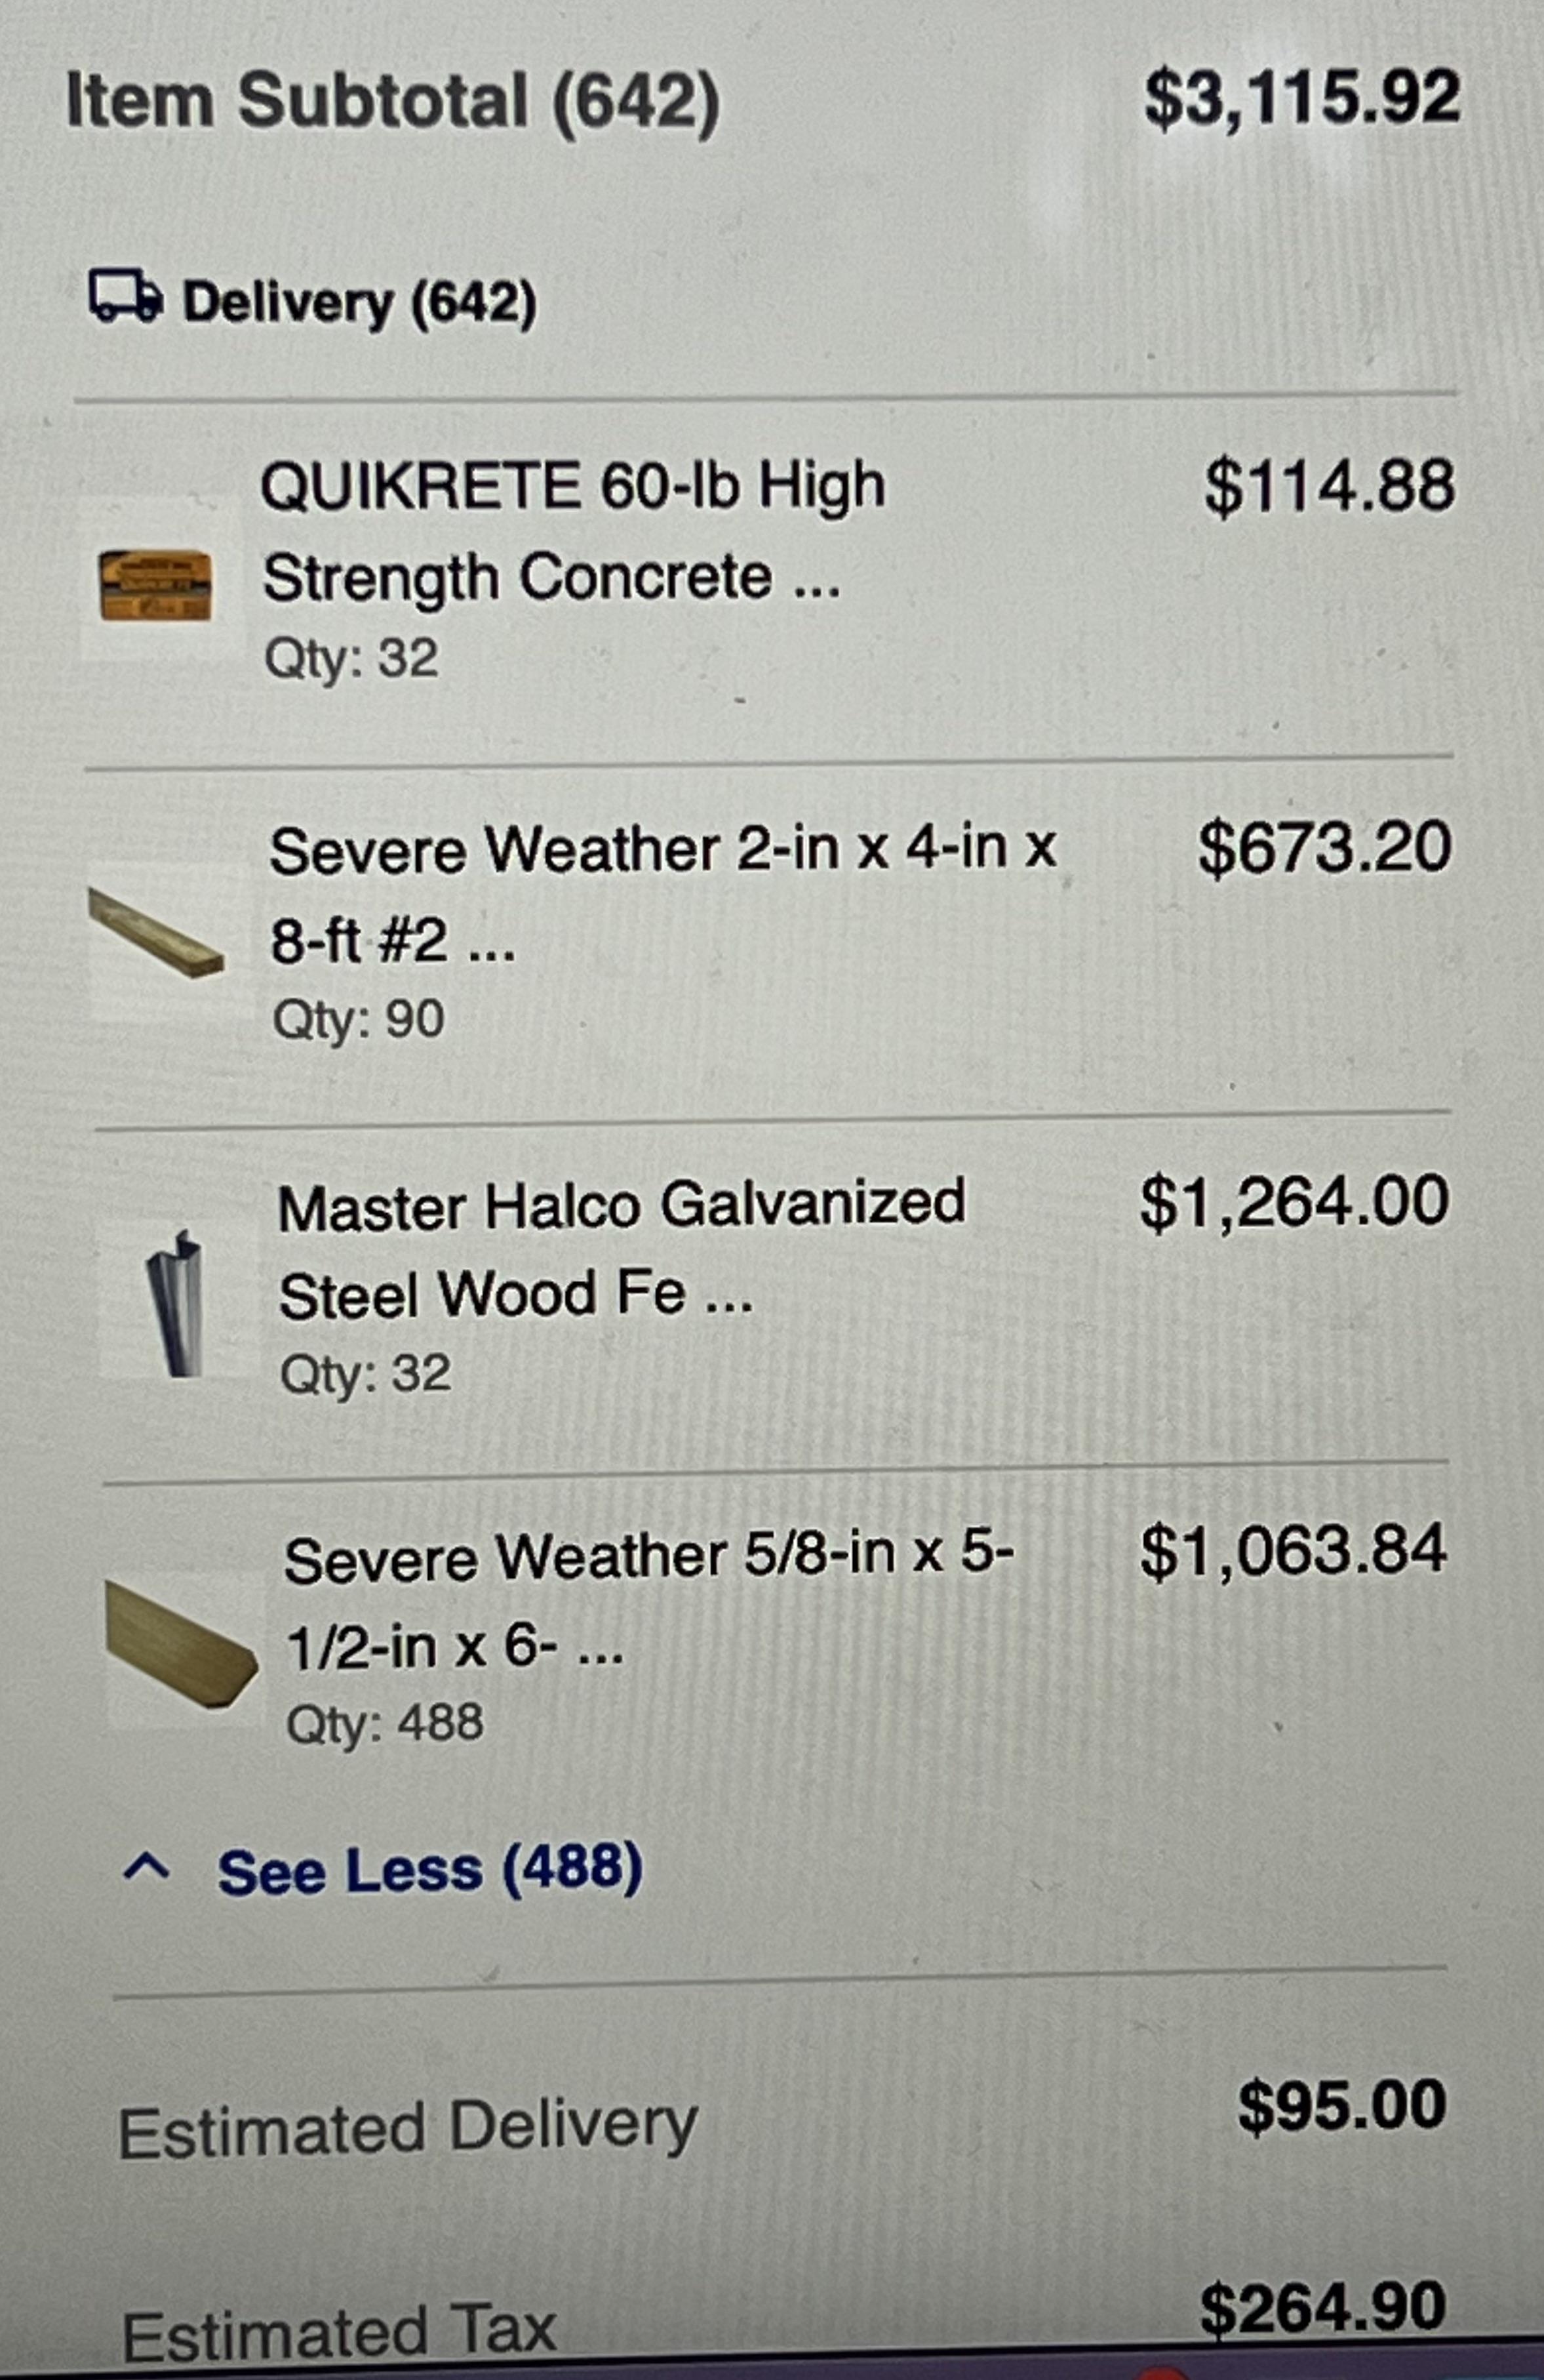 lowes delivery fee